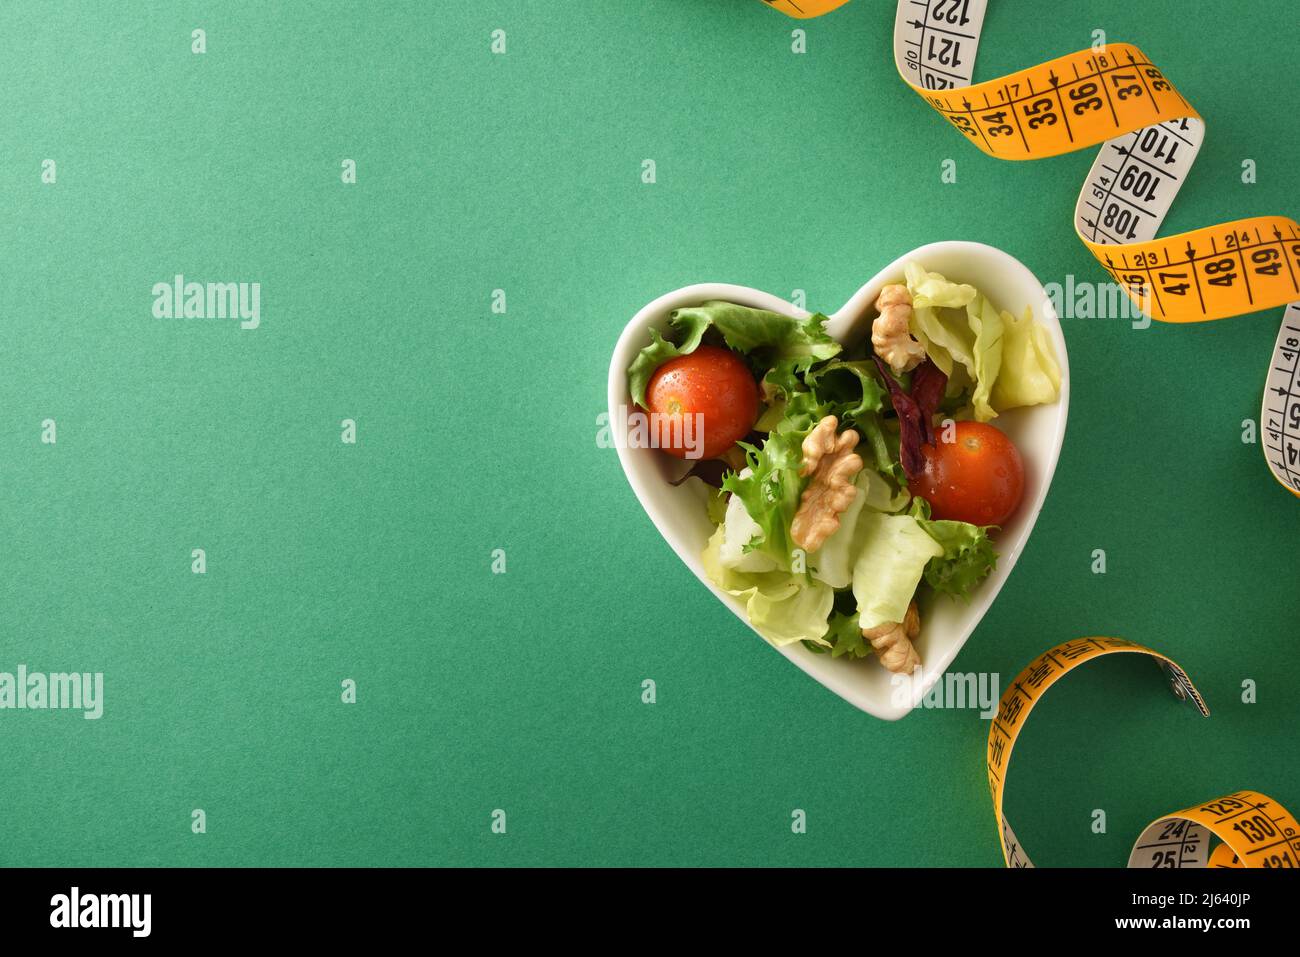 Concept of diet and health with heart-shaped bowl with salad with nuts and metric tape on a green background. Top view. Horizontal composition. Stock Photo